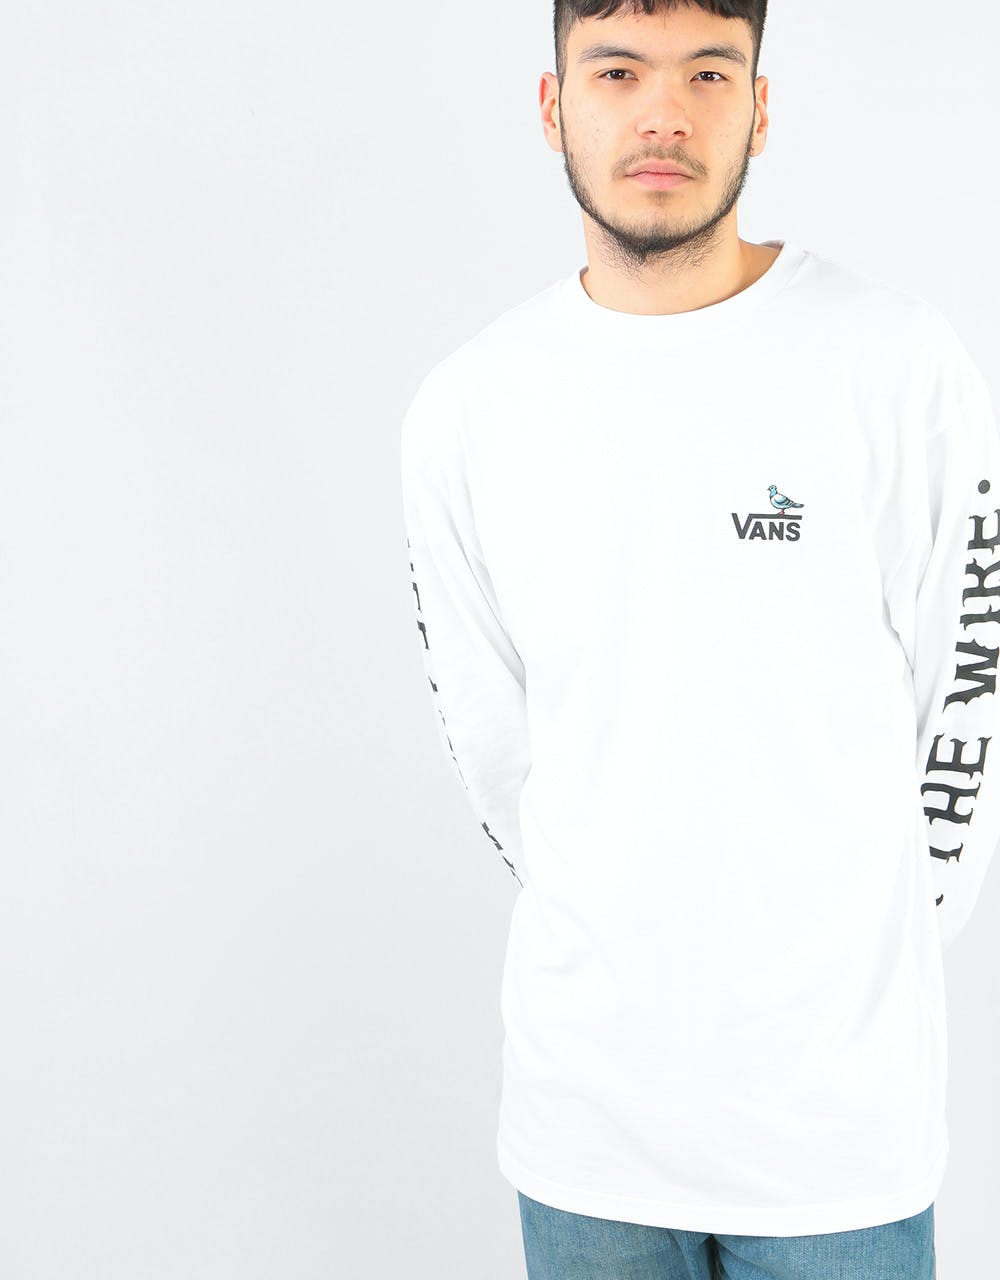 Vans x Anti Hero On the Wire L/S T-Shirt - White